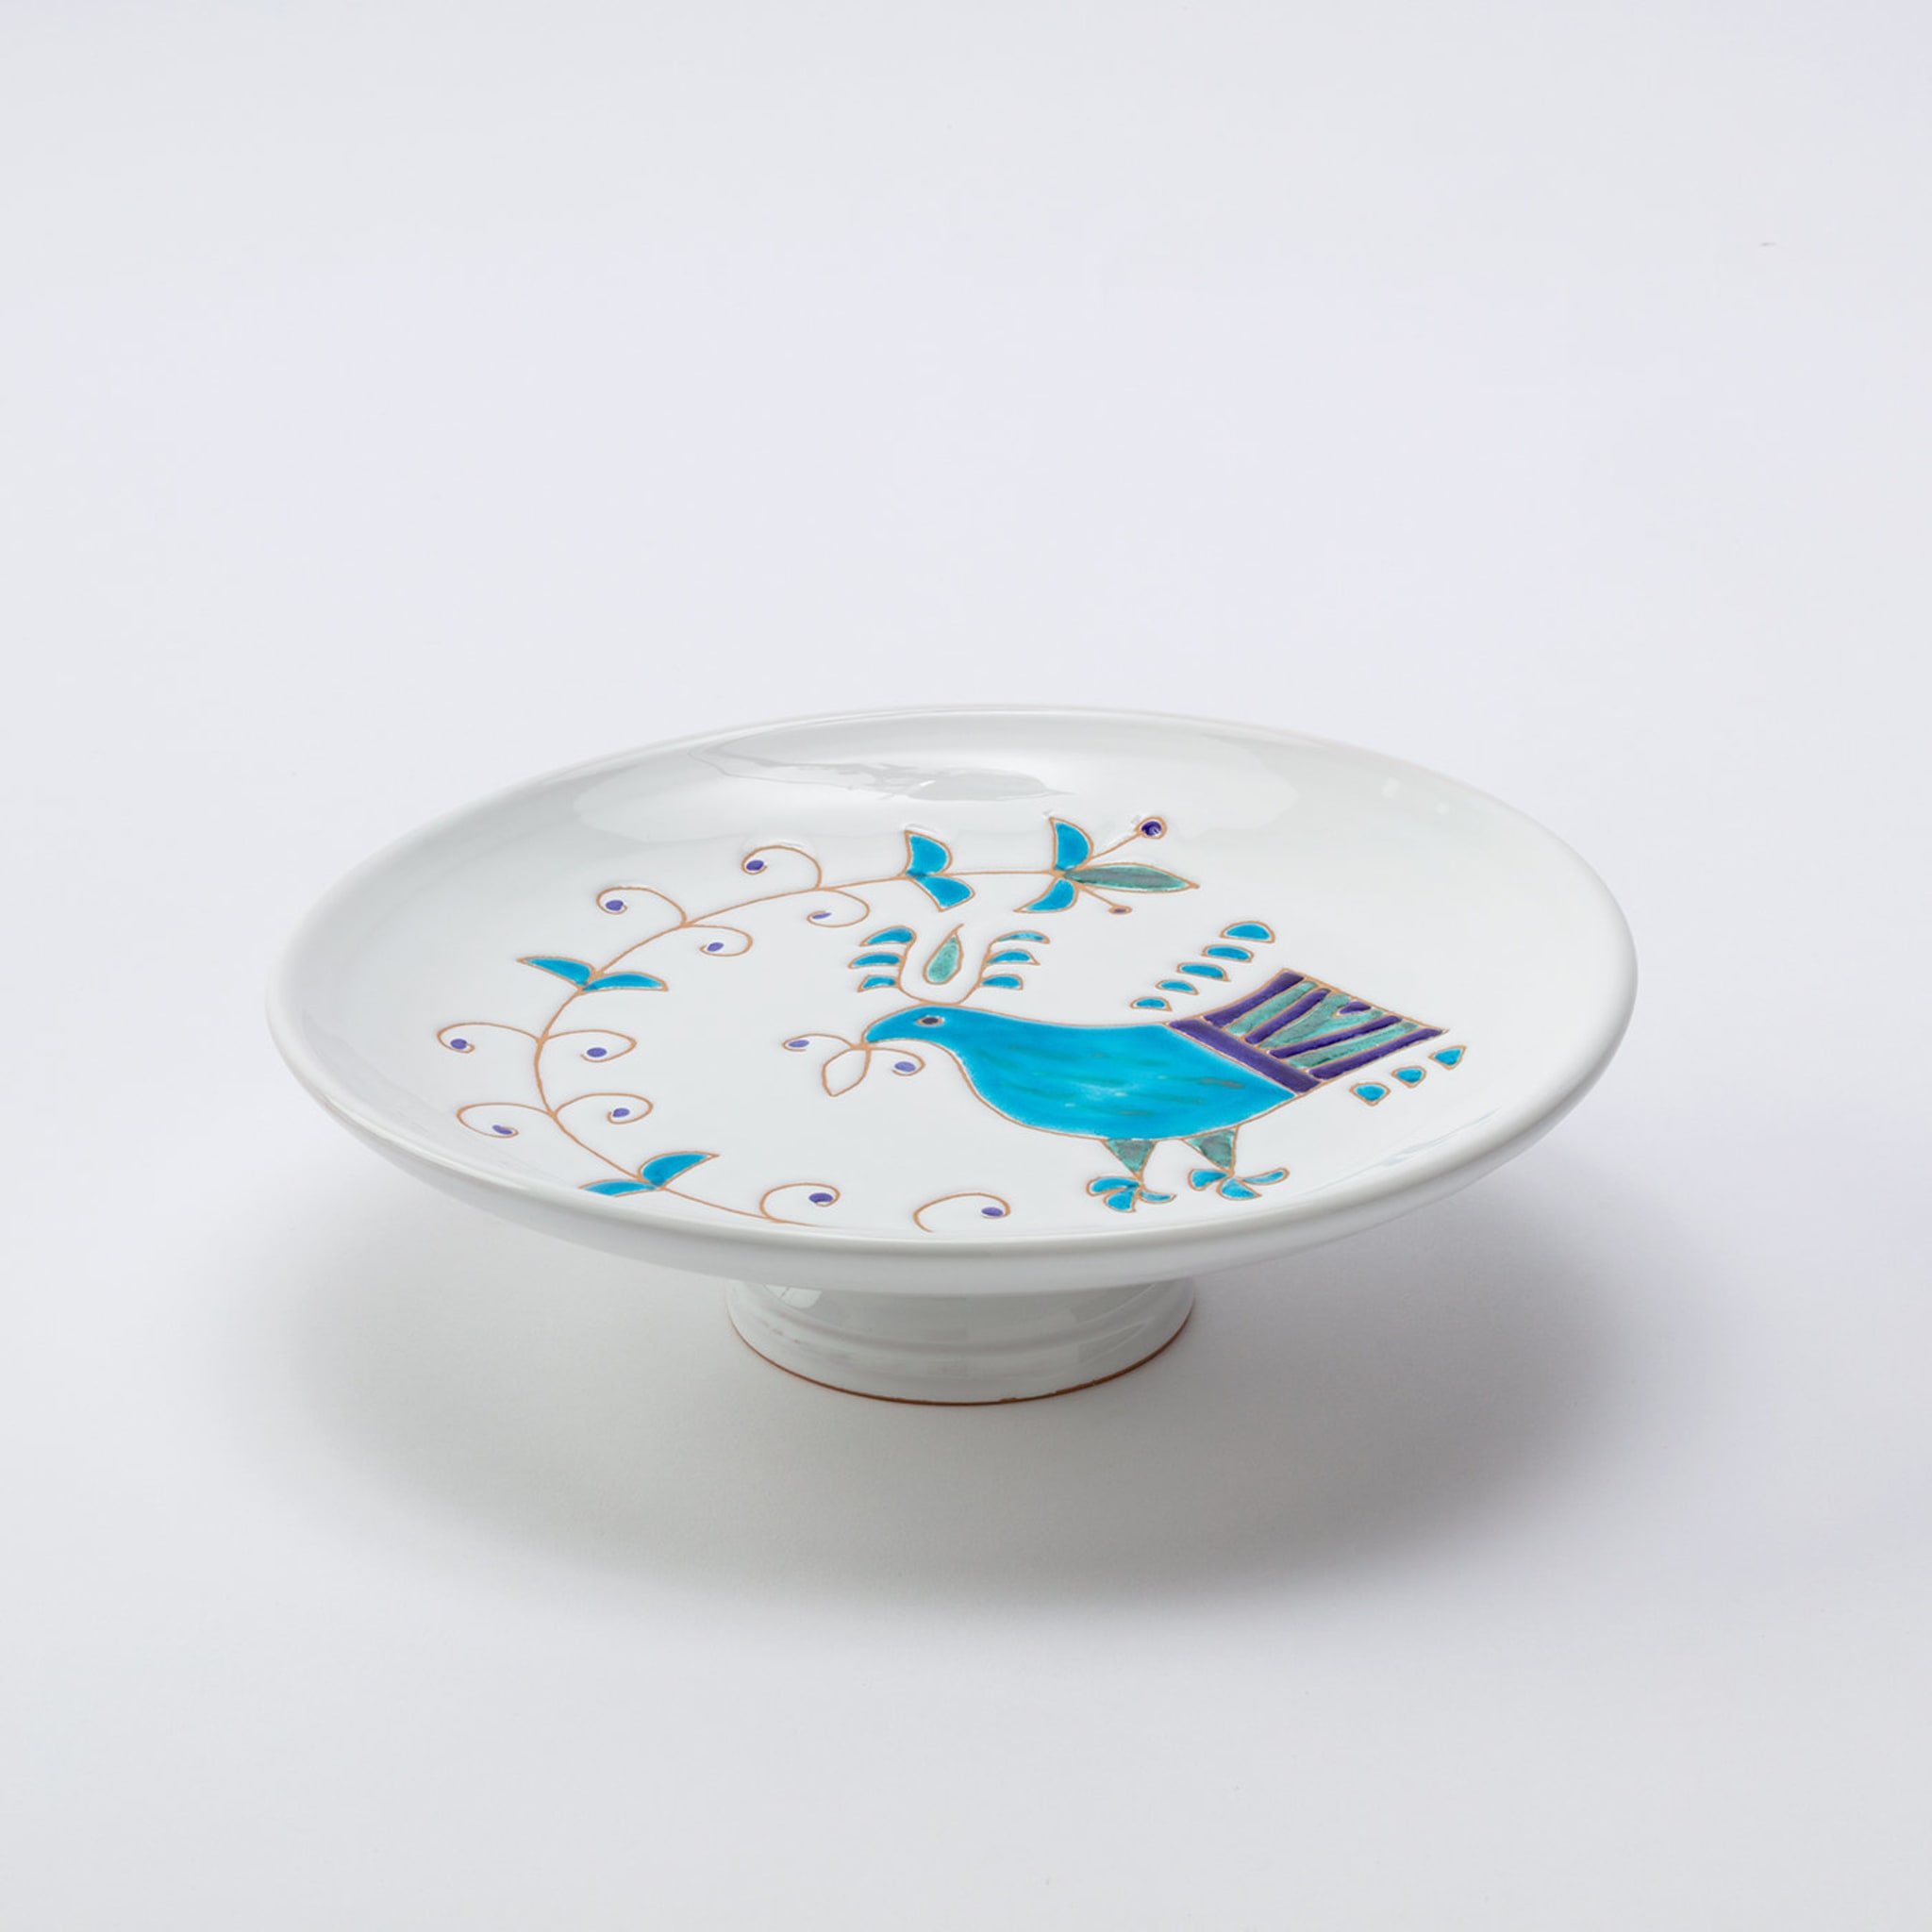 Le Pavoncelle Cake Stand - Alternative view 1